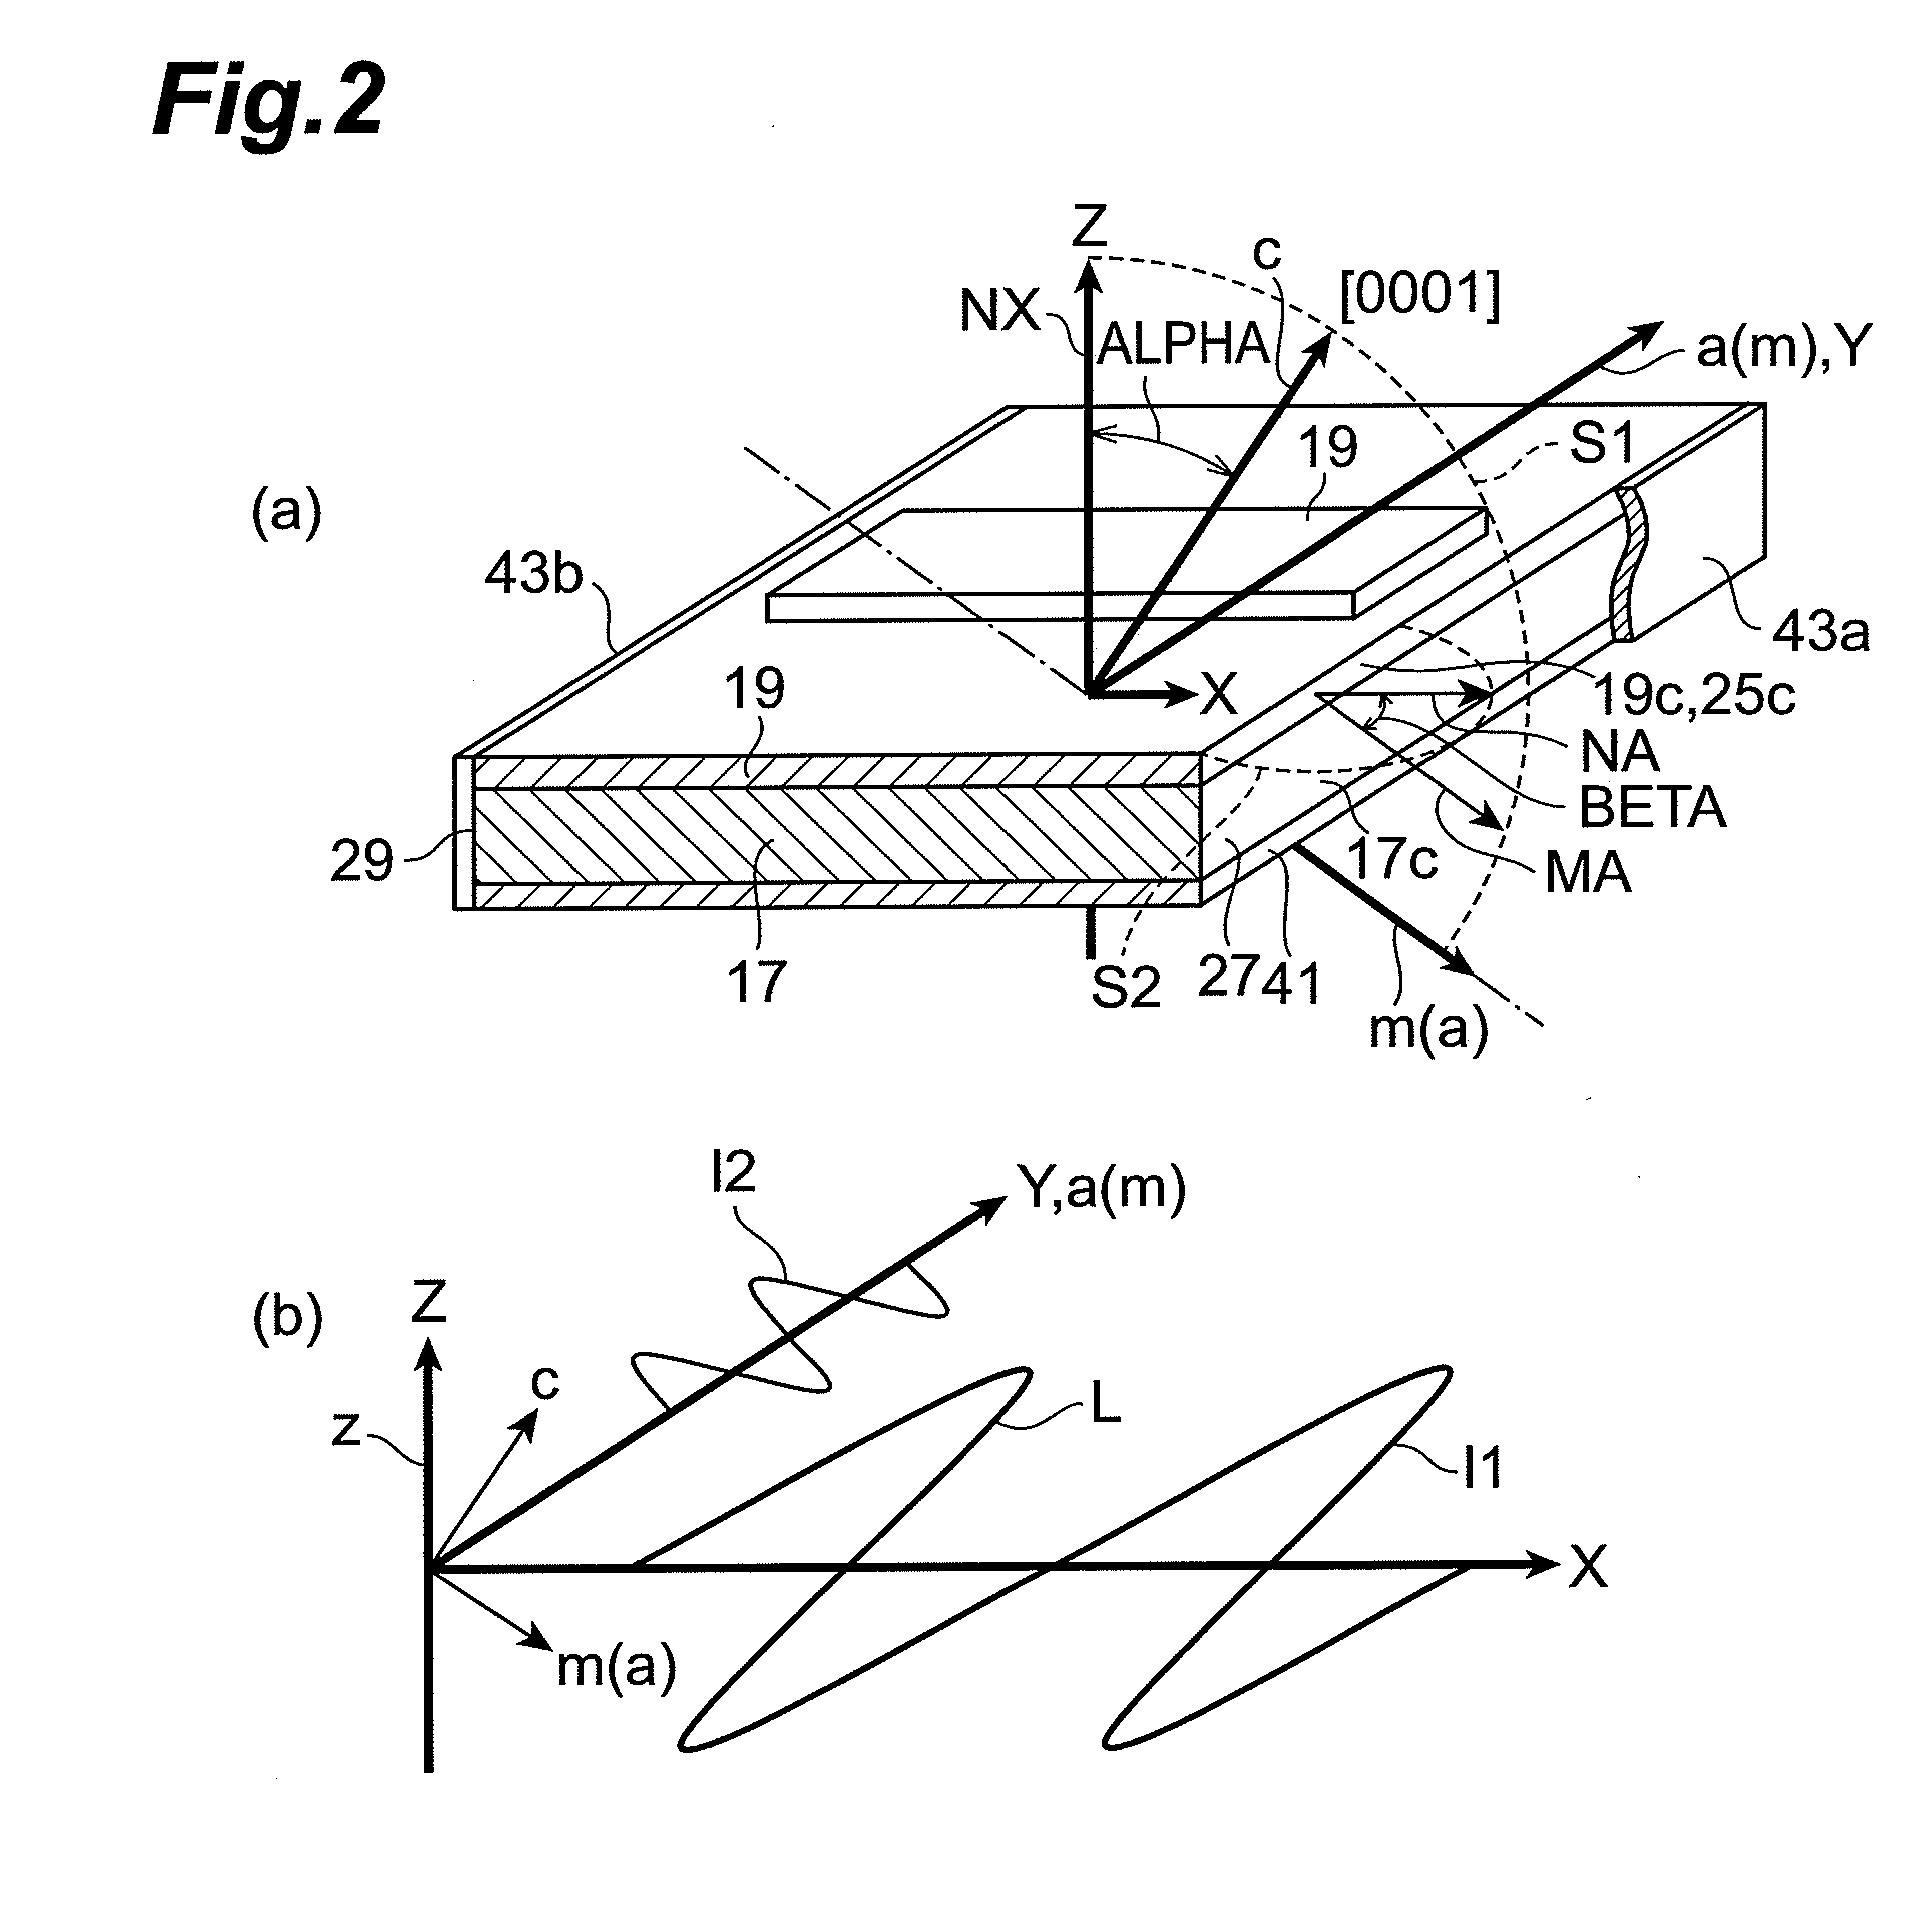 Iii-intride semiconductor laser device, and method of fabricating the iii-nitride semiconductor laser device